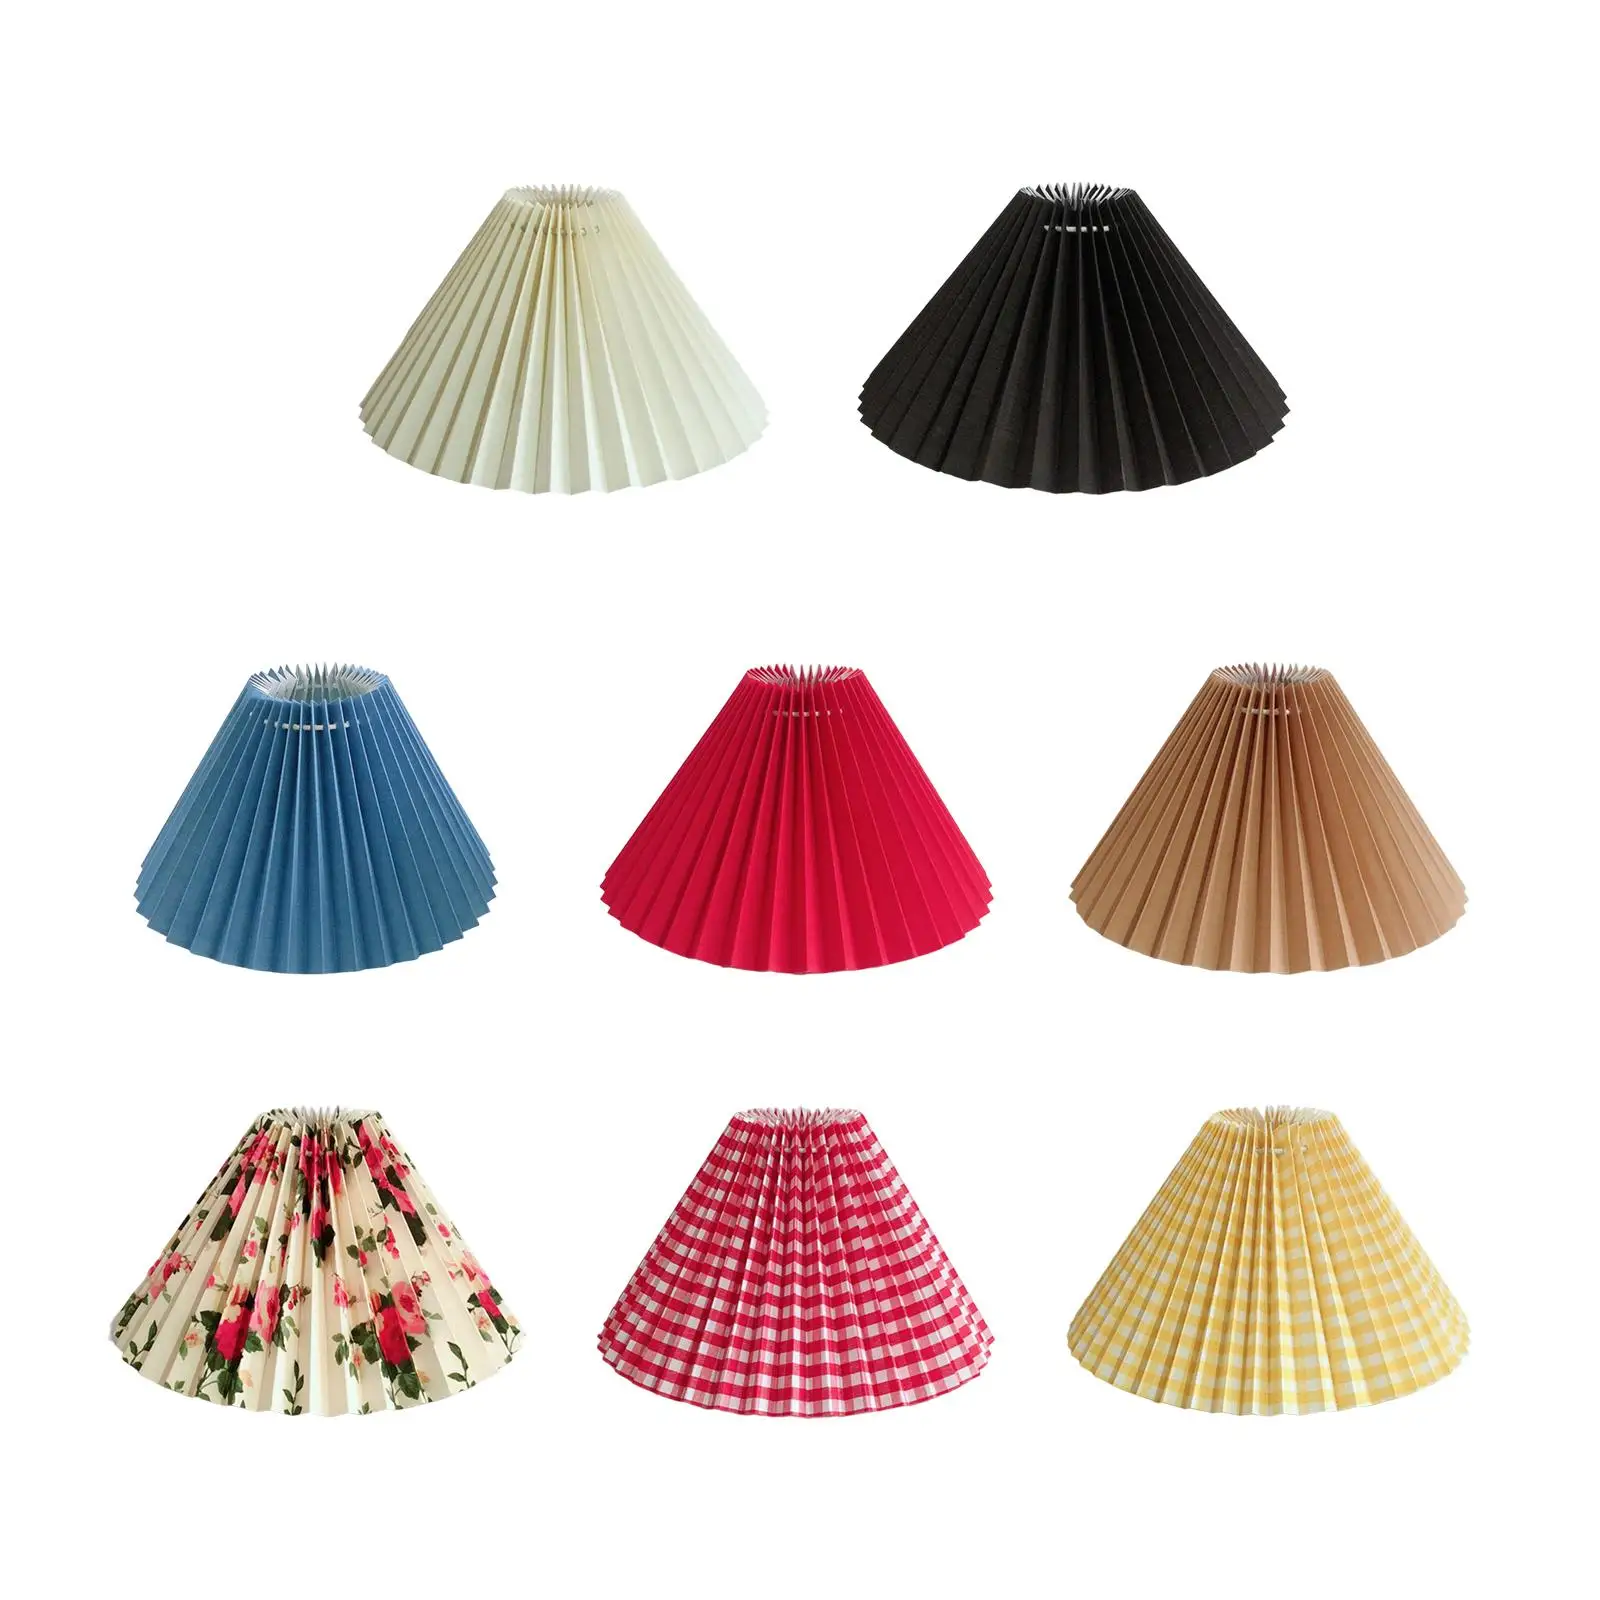 24cm Pleated Lampshade Office Ceiling Light Shade Replacement Floor Lamp